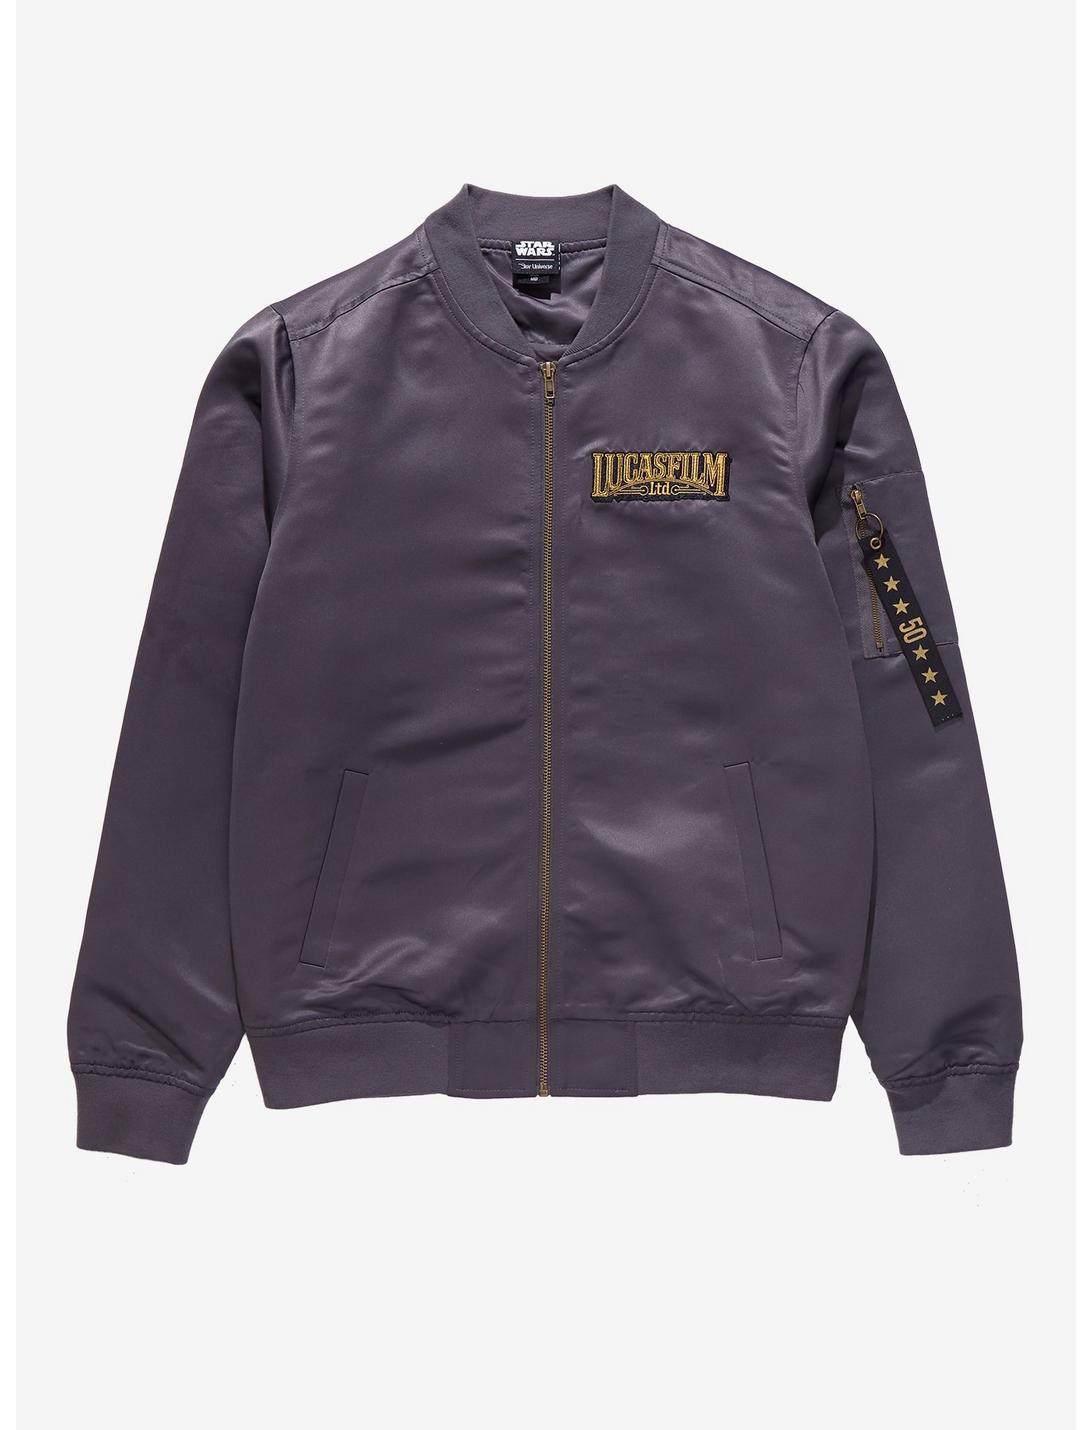 Our Universe Lucasfilm 50th Anniversary Star Wars Bomber Jacket Her Universe Exclusive, MULTI, hi-res